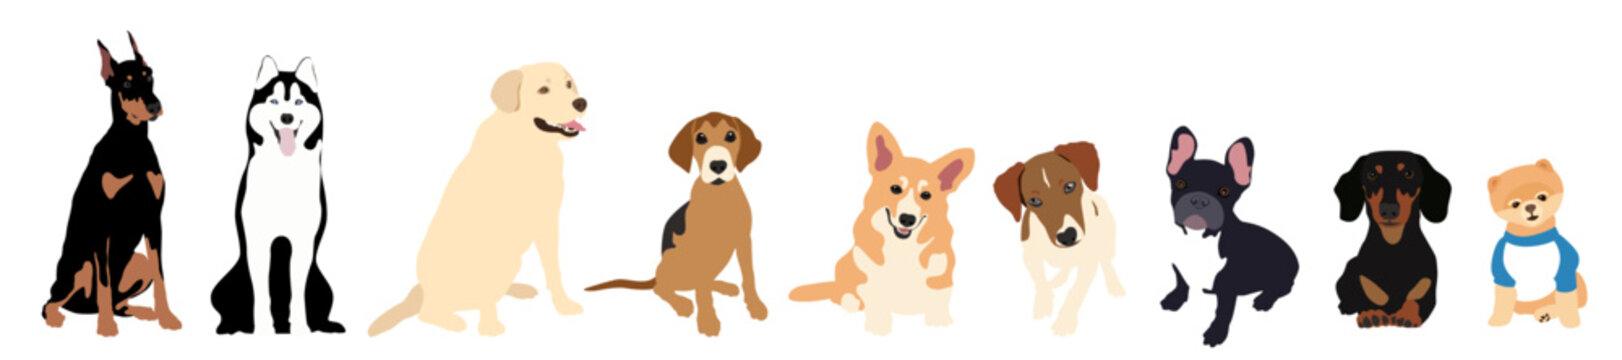 Vector image. The picture shows how dogs are drawn by hand with a seated pose of different breeds, such as Labrador Retriever, Pomeranian, Doberman, Corgi, Beagle, Jack Russell, French Bulldog, Husky.